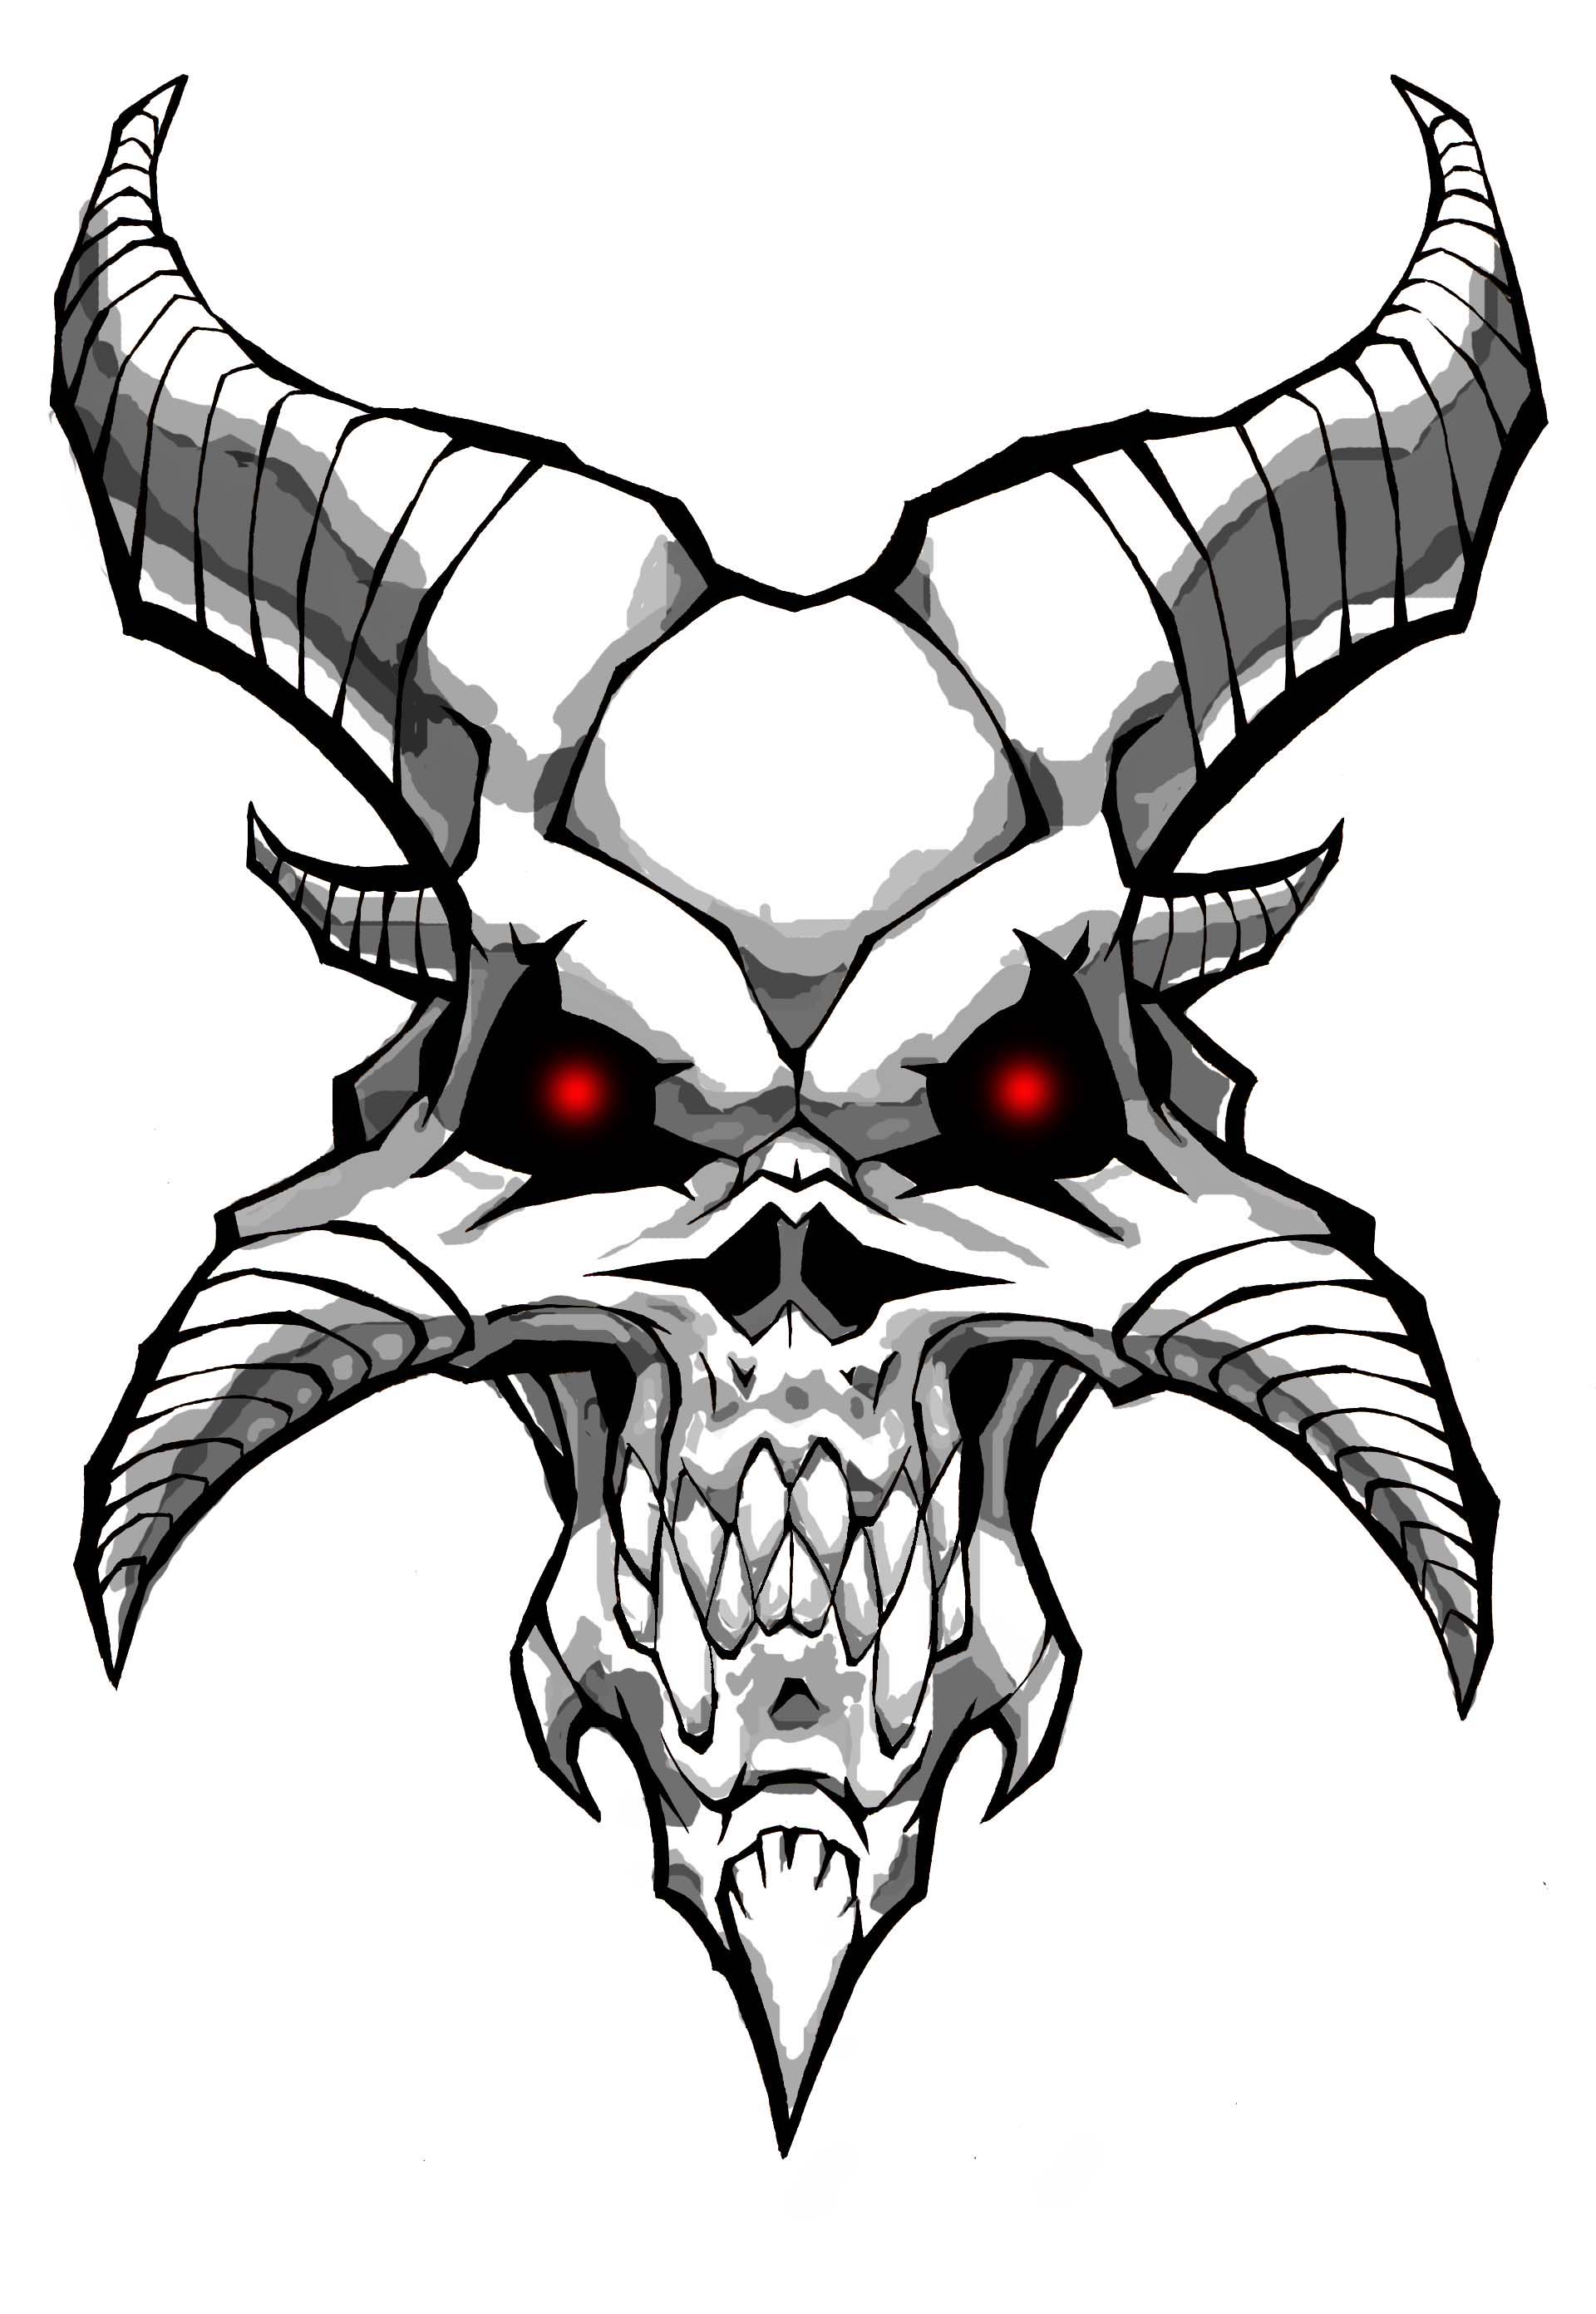 Demon Skull by DeathsProdigy on Clipart library